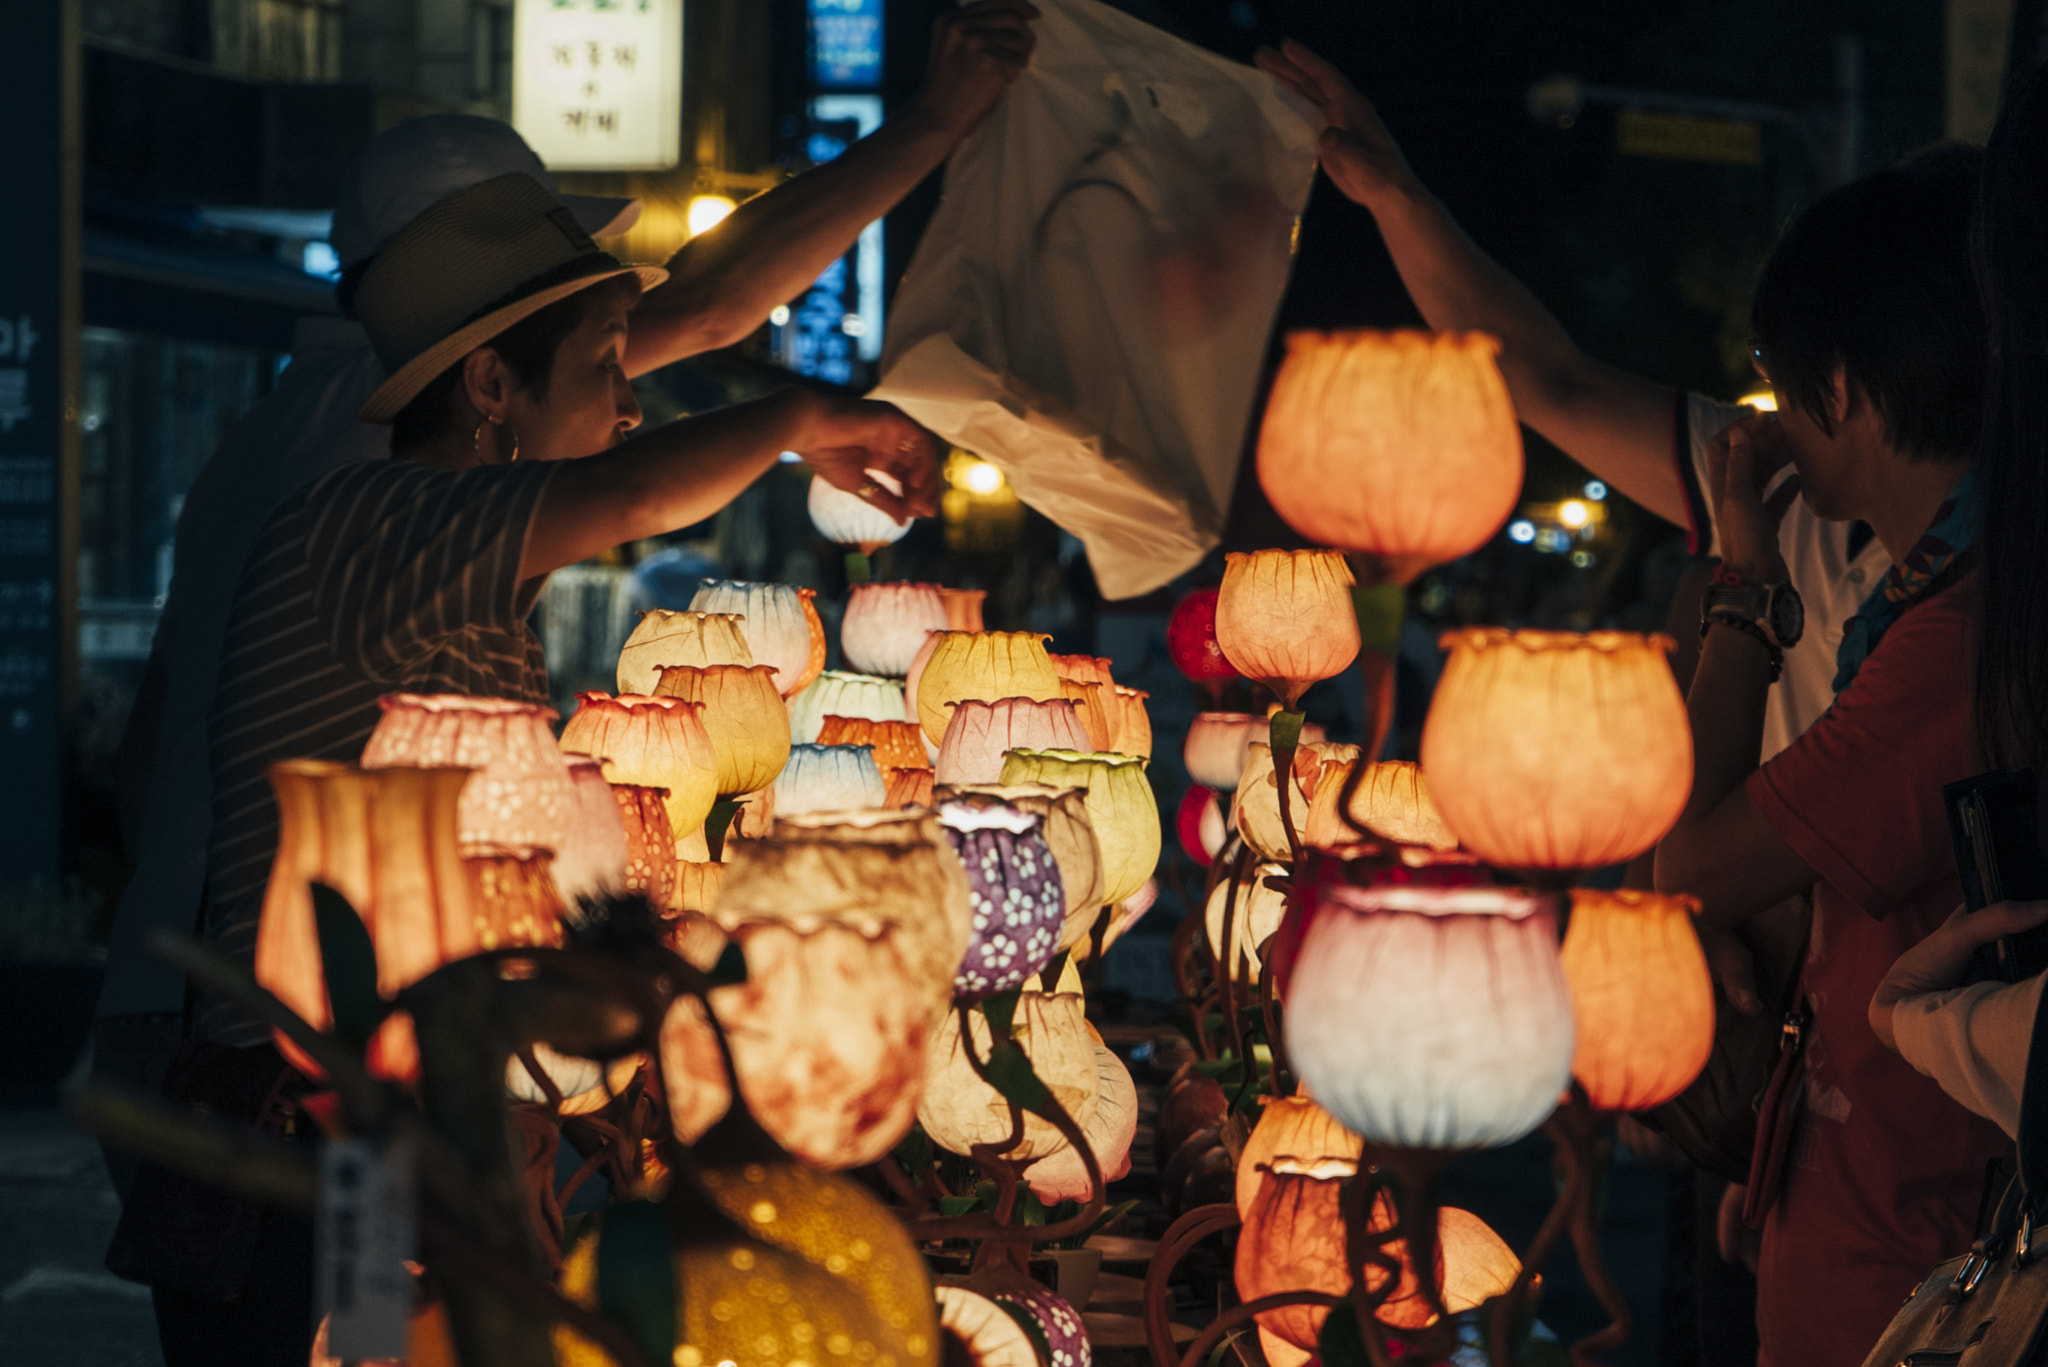 Sony a7S sample photo. Asian woman selling lamps photography